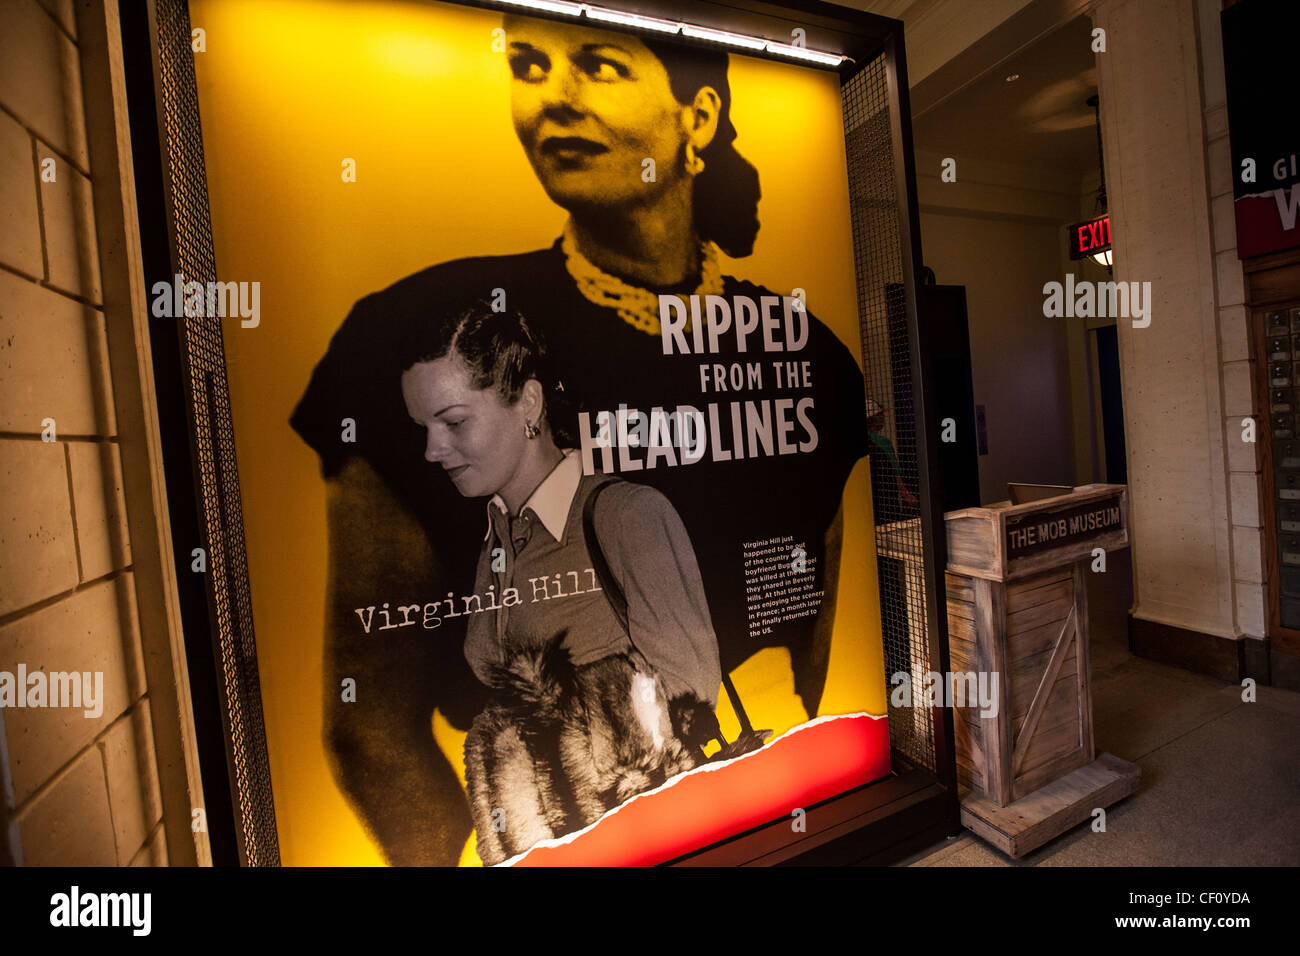 Entrance to the Mob Museum opened in a former courthouse in Las Vegas on February 14, 2012. The $42 million dollar museum features exhibits on organized crime in America with emphasis on their role in Las Vegas. Stock Photo